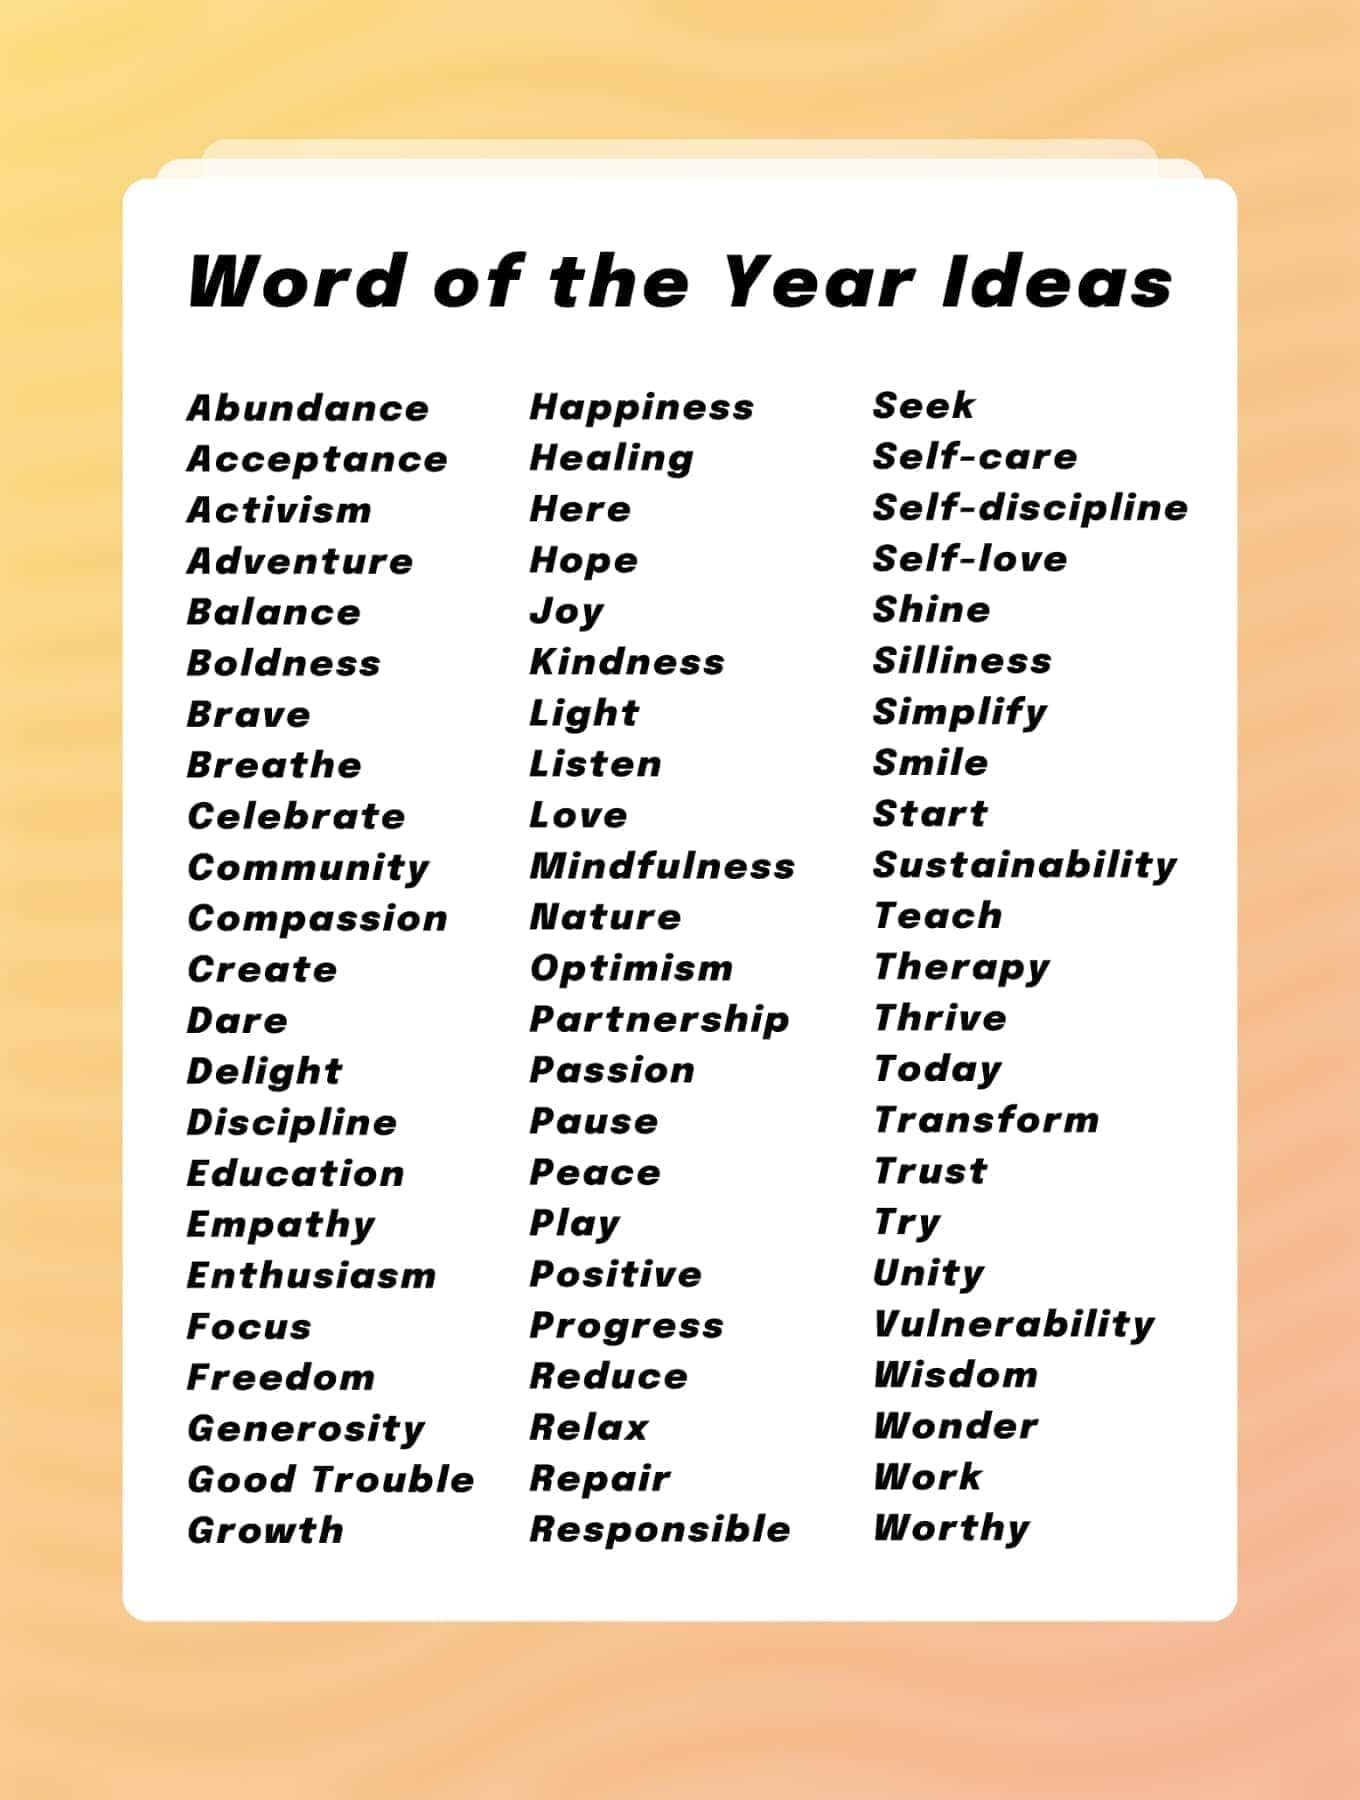 A list of the best 'Word of the Year' ideas